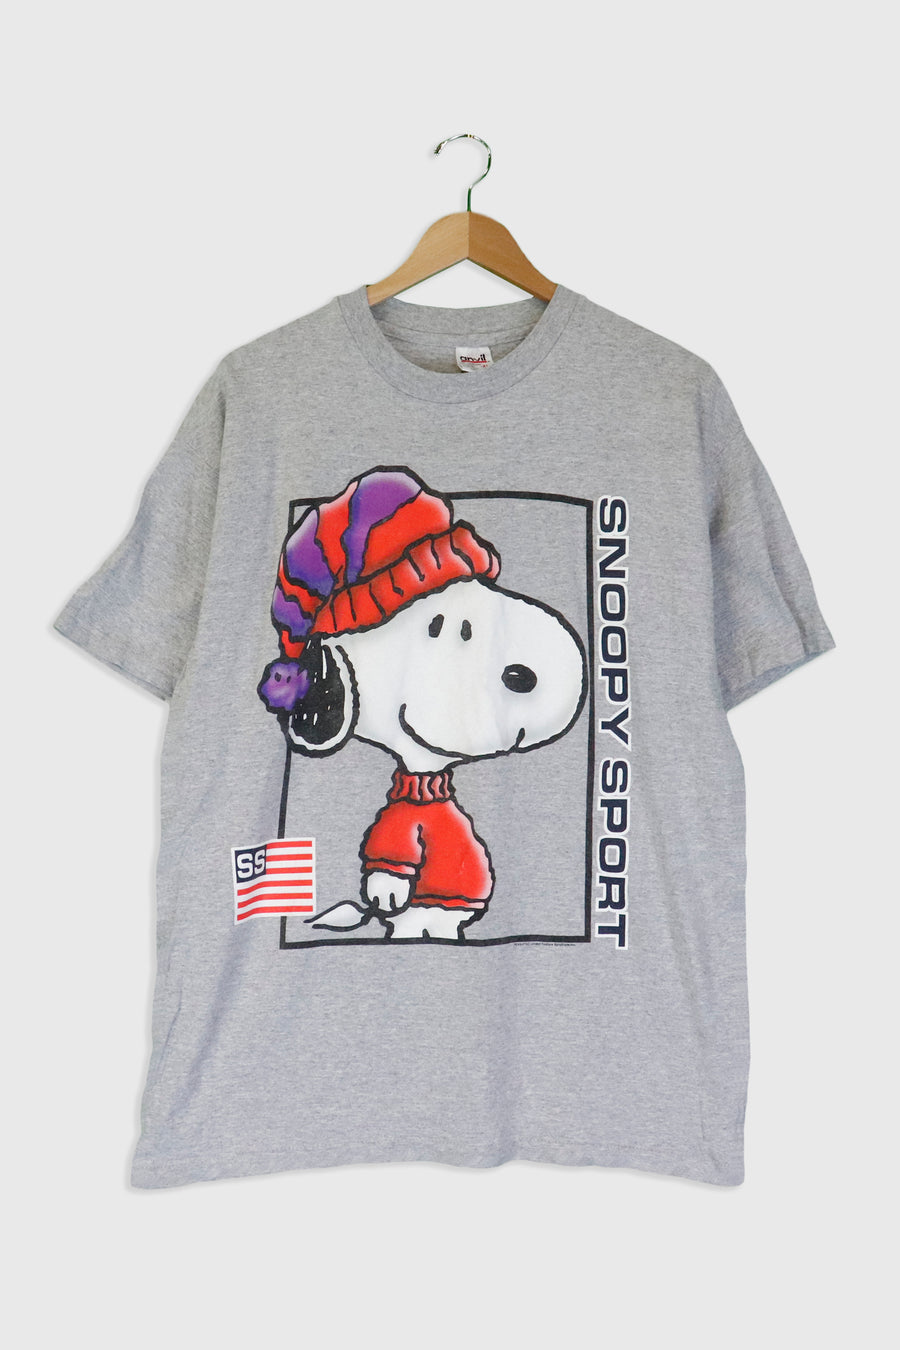 Vintage Snoopy Sport Graphic T Shirt Sz XL – F As In Frank Vintage